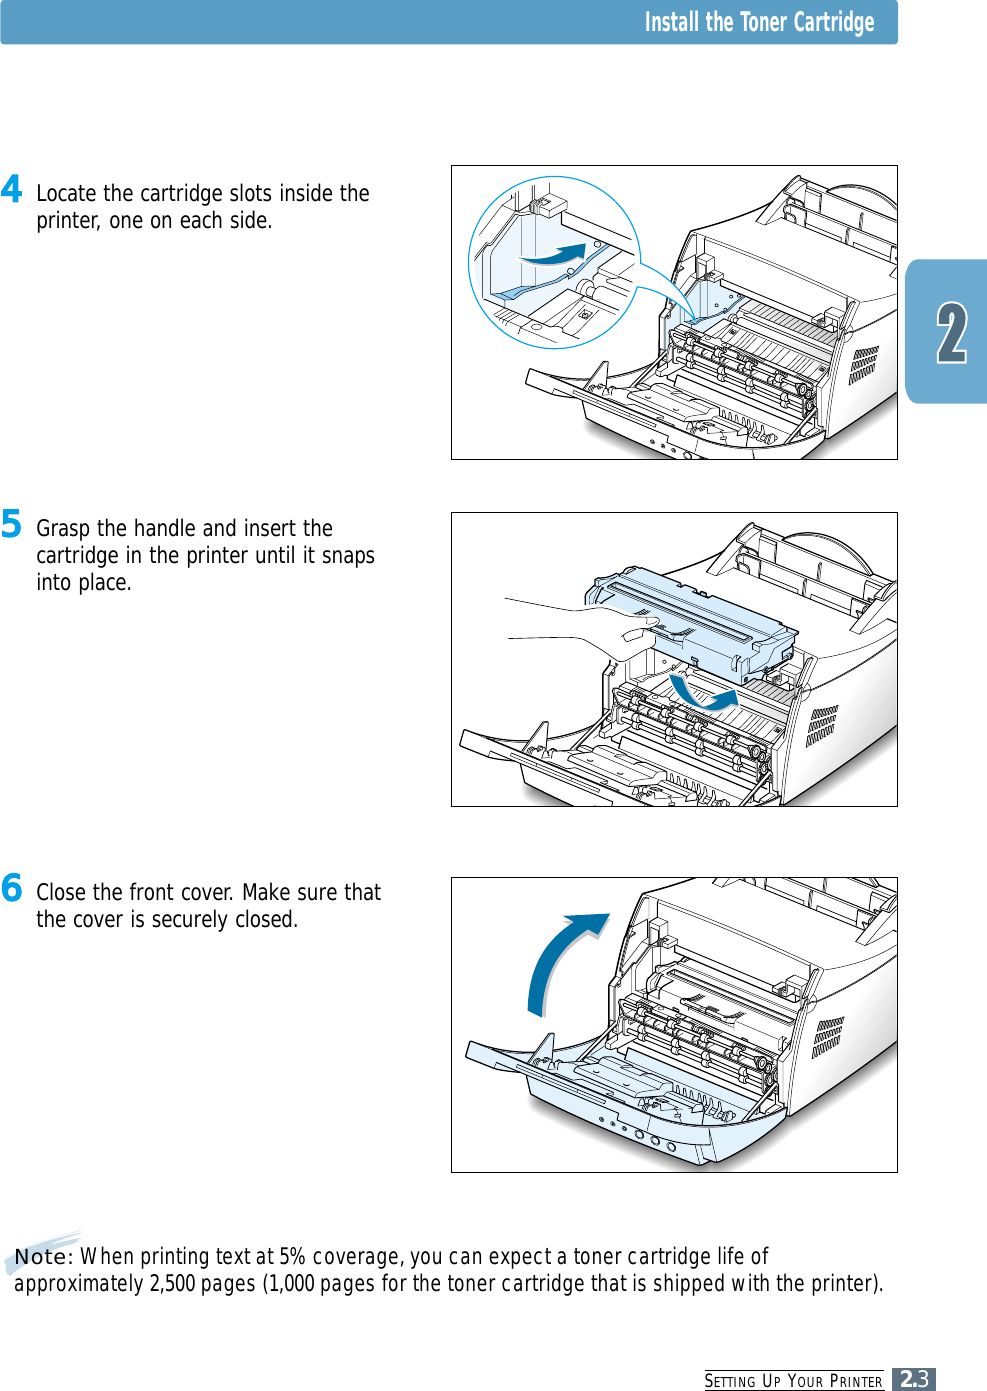 SETTING UPYOUR PRINTER2.3Note: When printing text at 5% coverage, you can expect a toner cartridge life ofapproximately 2,500 pages (1,000 pages for the toner cartridge that is shipped with the printer).5Grasp the handle and insert thecartridge in the printer until it snapsinto place.6Close the front cover. Make sure thatthe cover is securely closed.4Locate the cartridge slots inside theprinter, one on each side.Install the Toner Cartridge